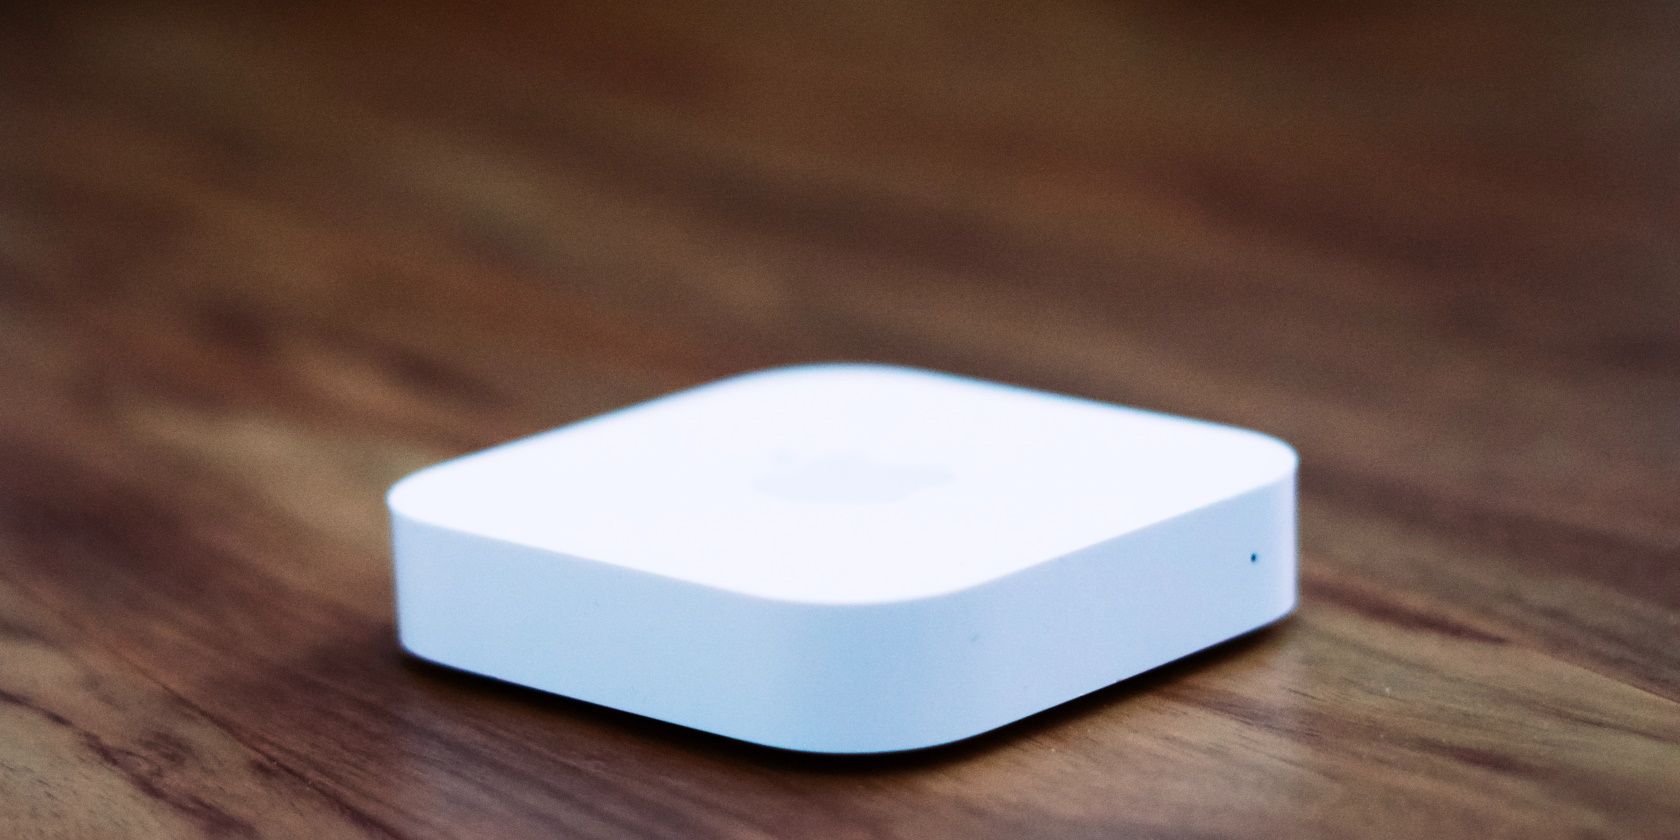 A white MiFi device on a wooden surface